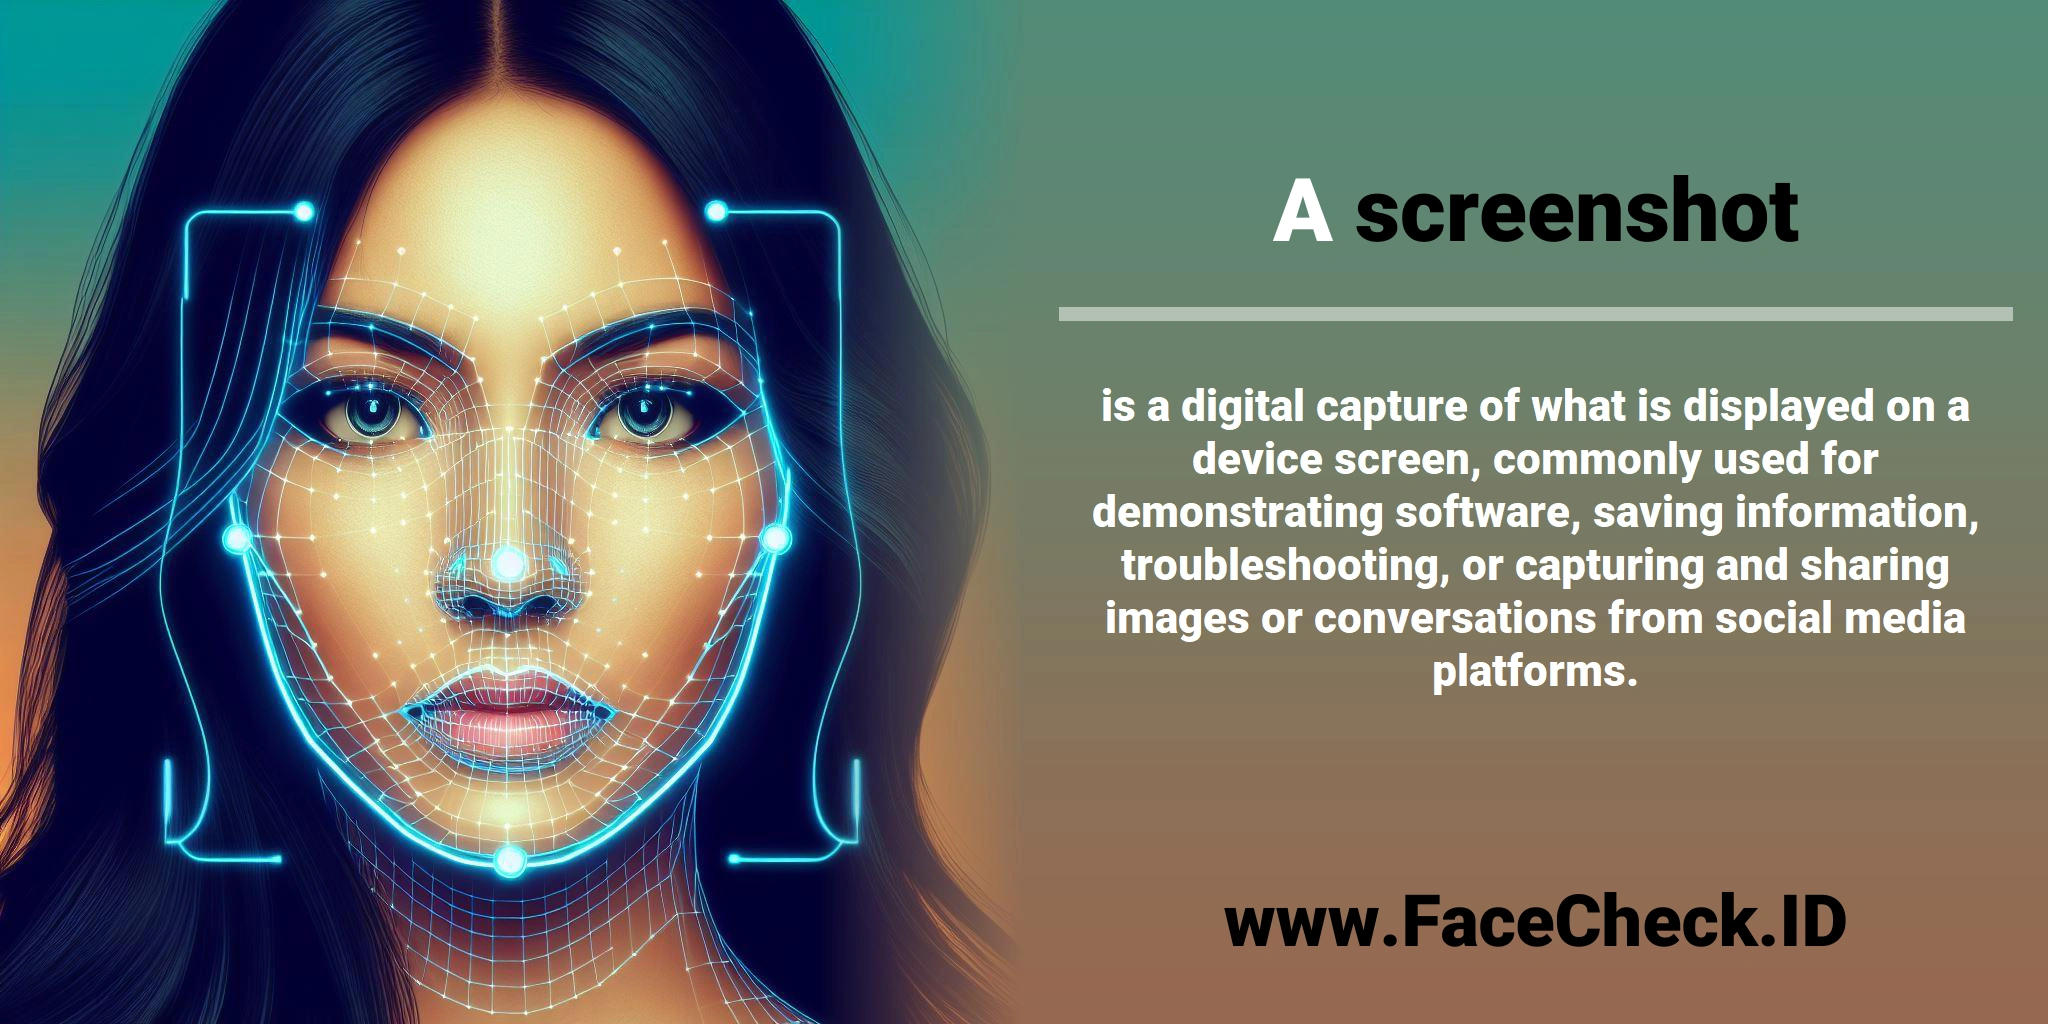 A <b>screenshot</b> is a digital capture of what is displayed on a device screen, commonly used for demonstrating software, saving information, troubleshooting, or capturing and sharing images or conversations from social media platforms.